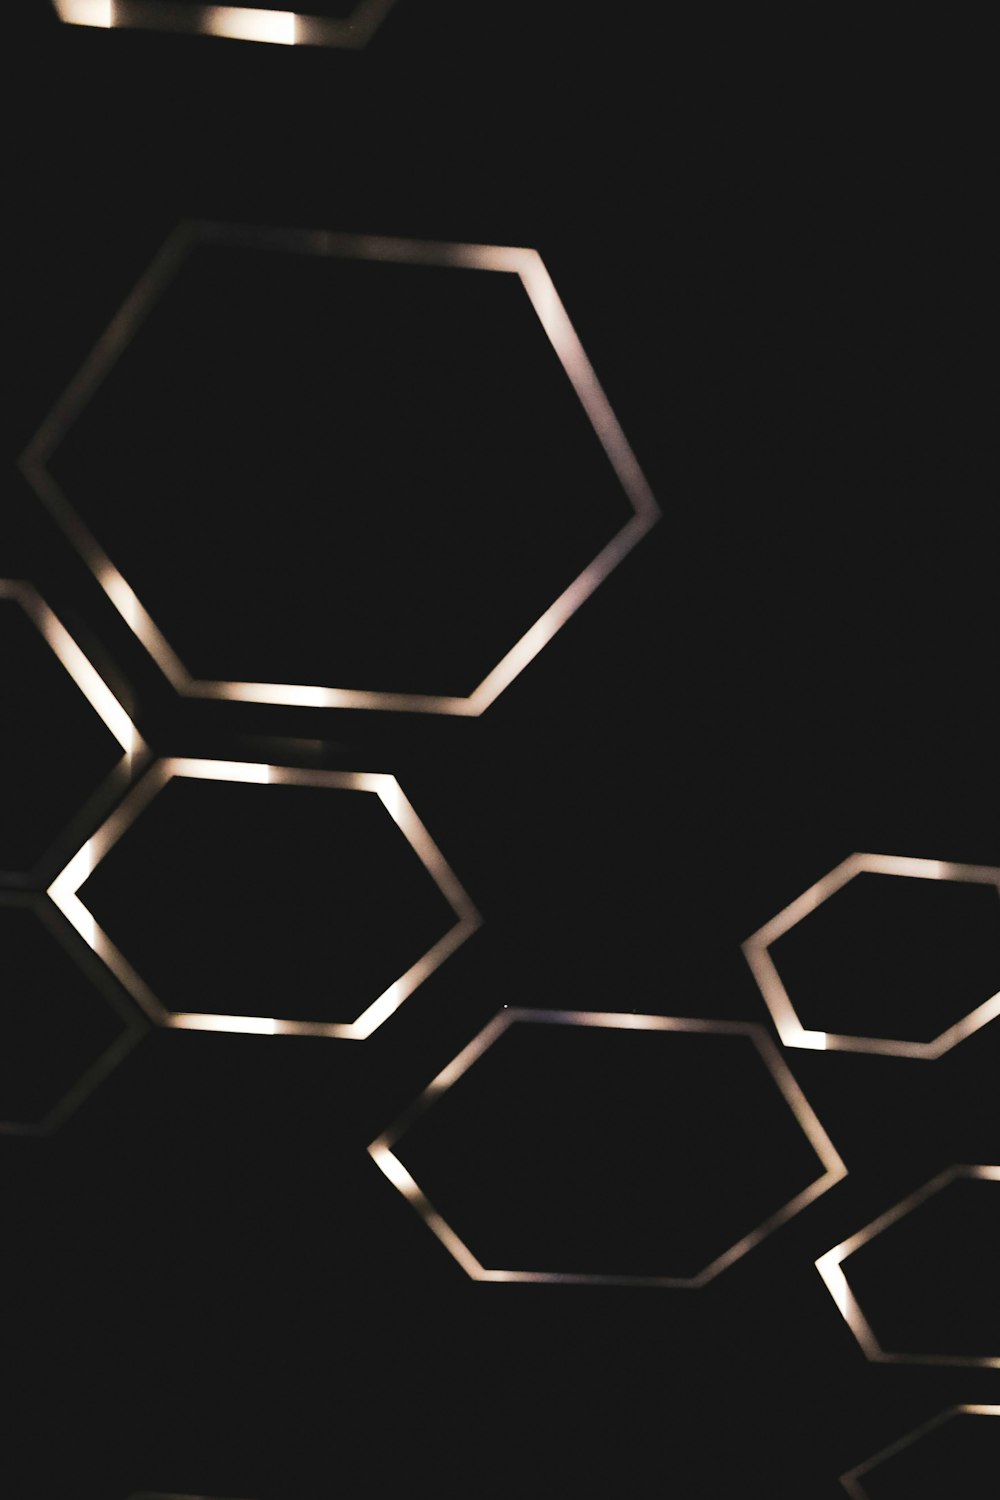 a bunch of hexagonal shapes are shown in the dark